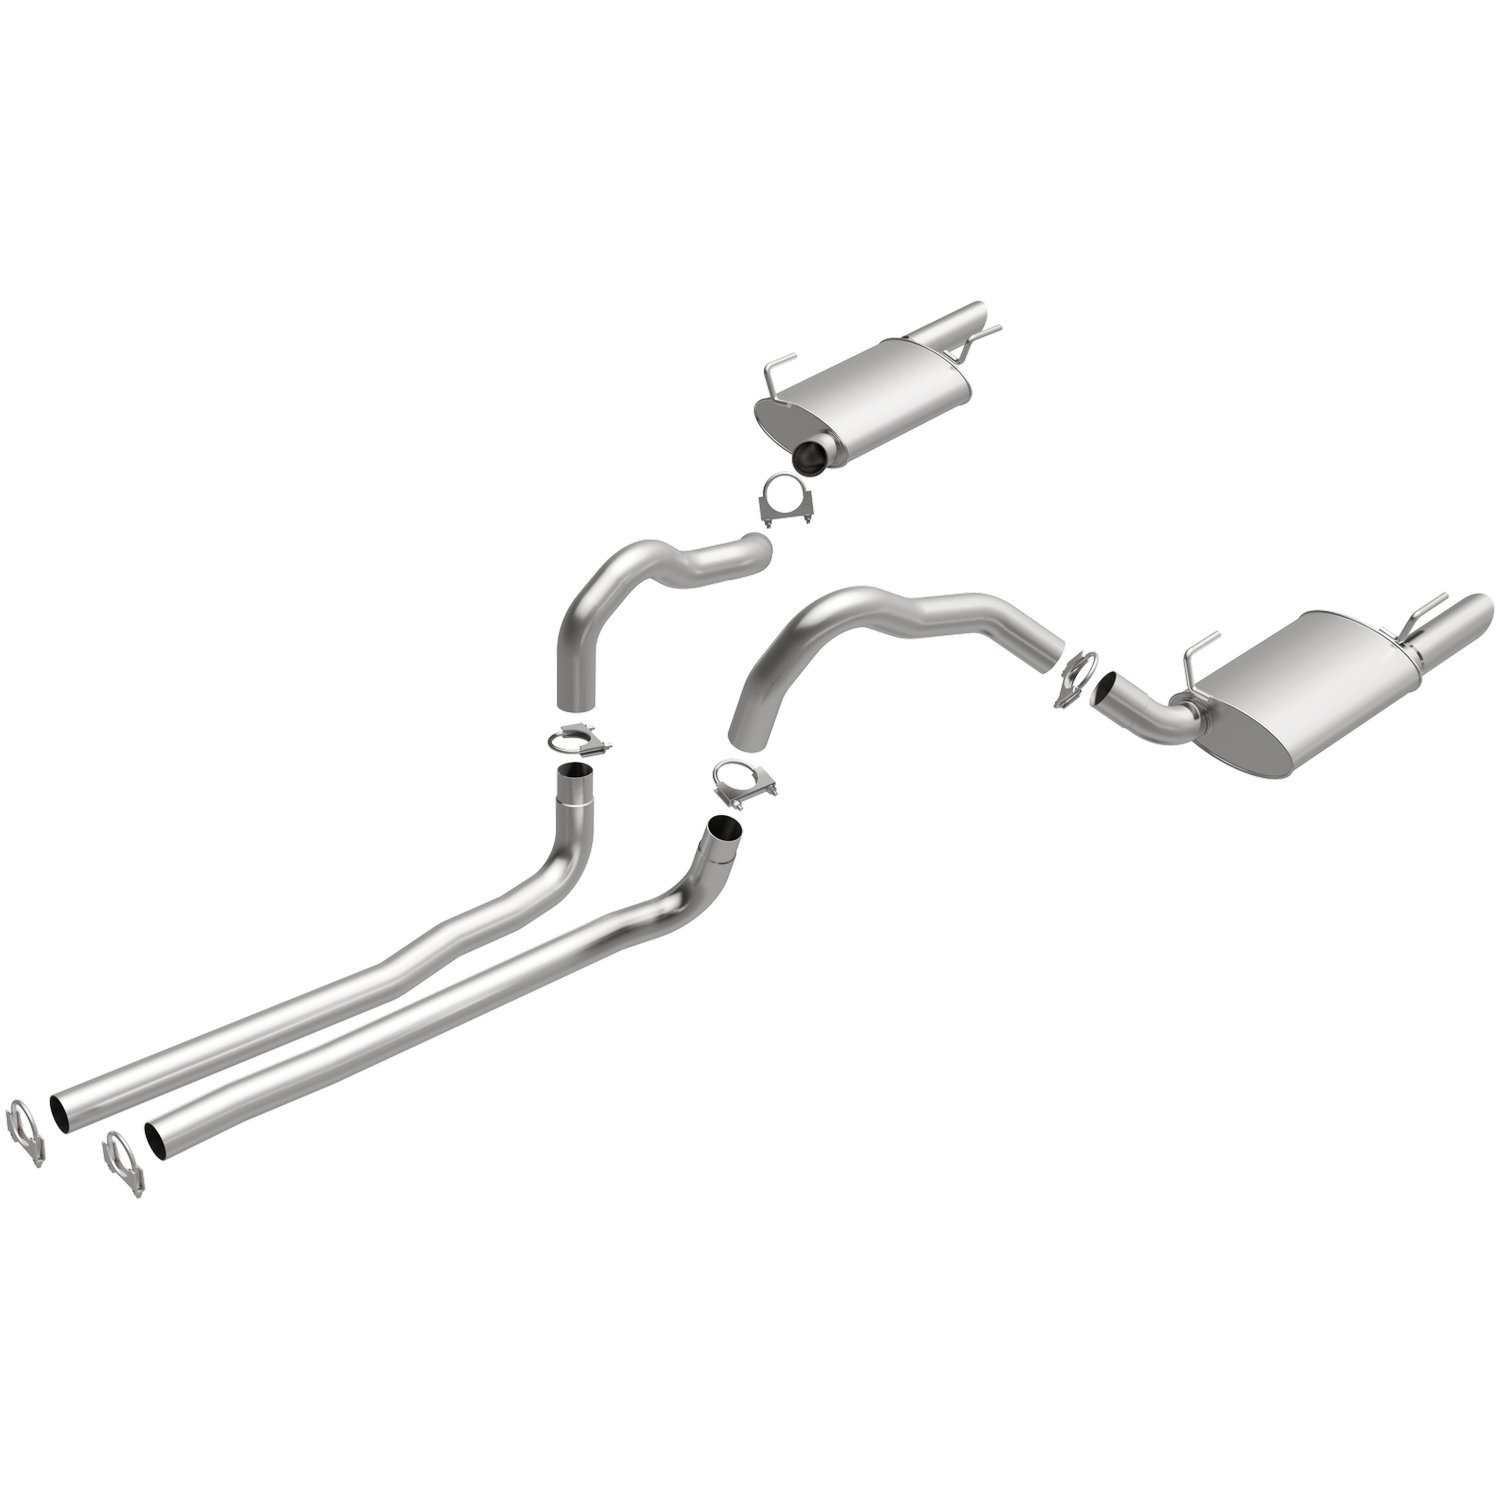 Direct-Fit Exhaust Kit, 2005-2010 Ford Mustang 4.6L